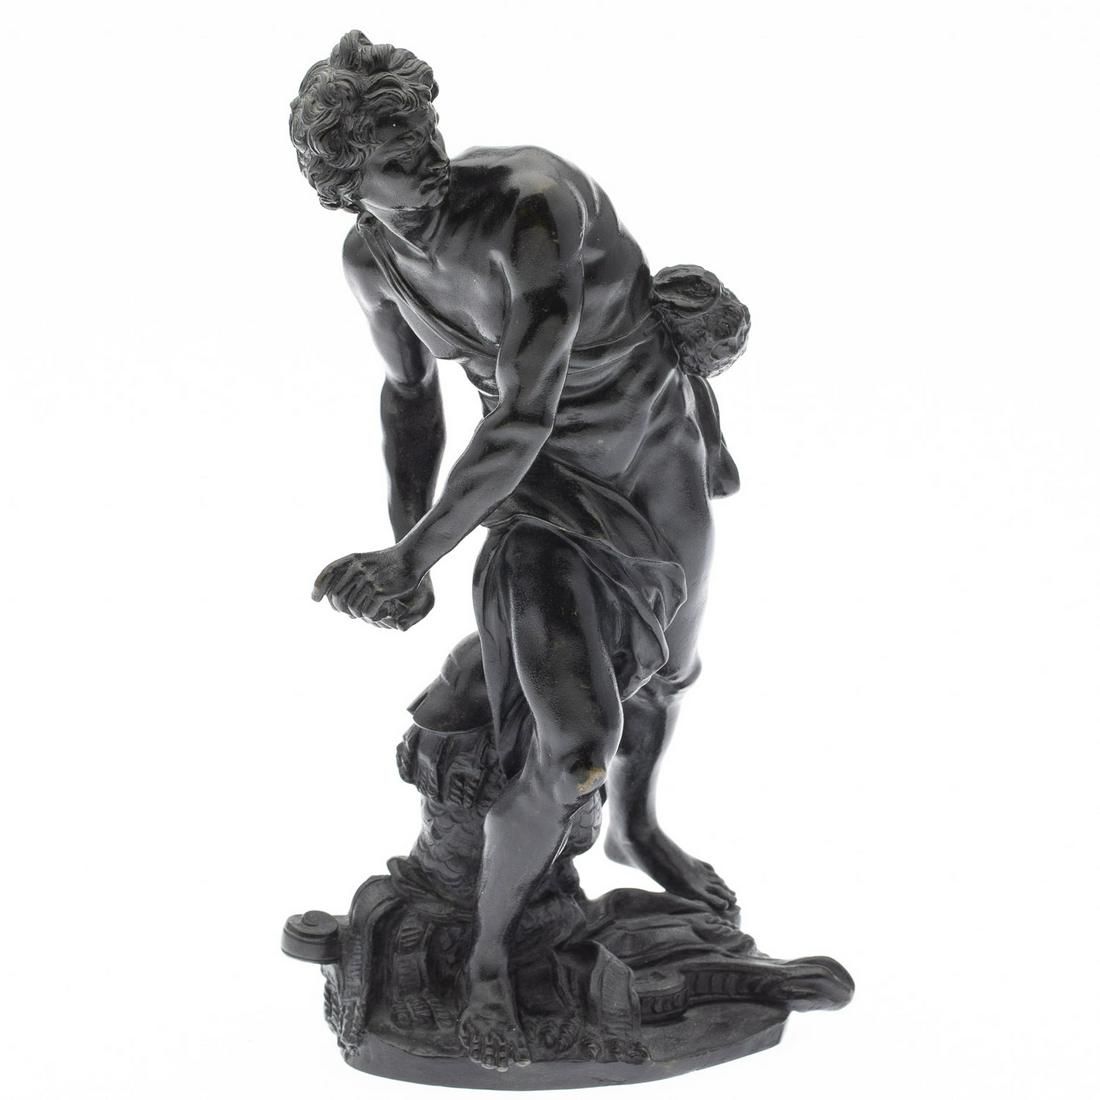 DISCUS THROWER AFTER THE ANTIQUE  3d3273